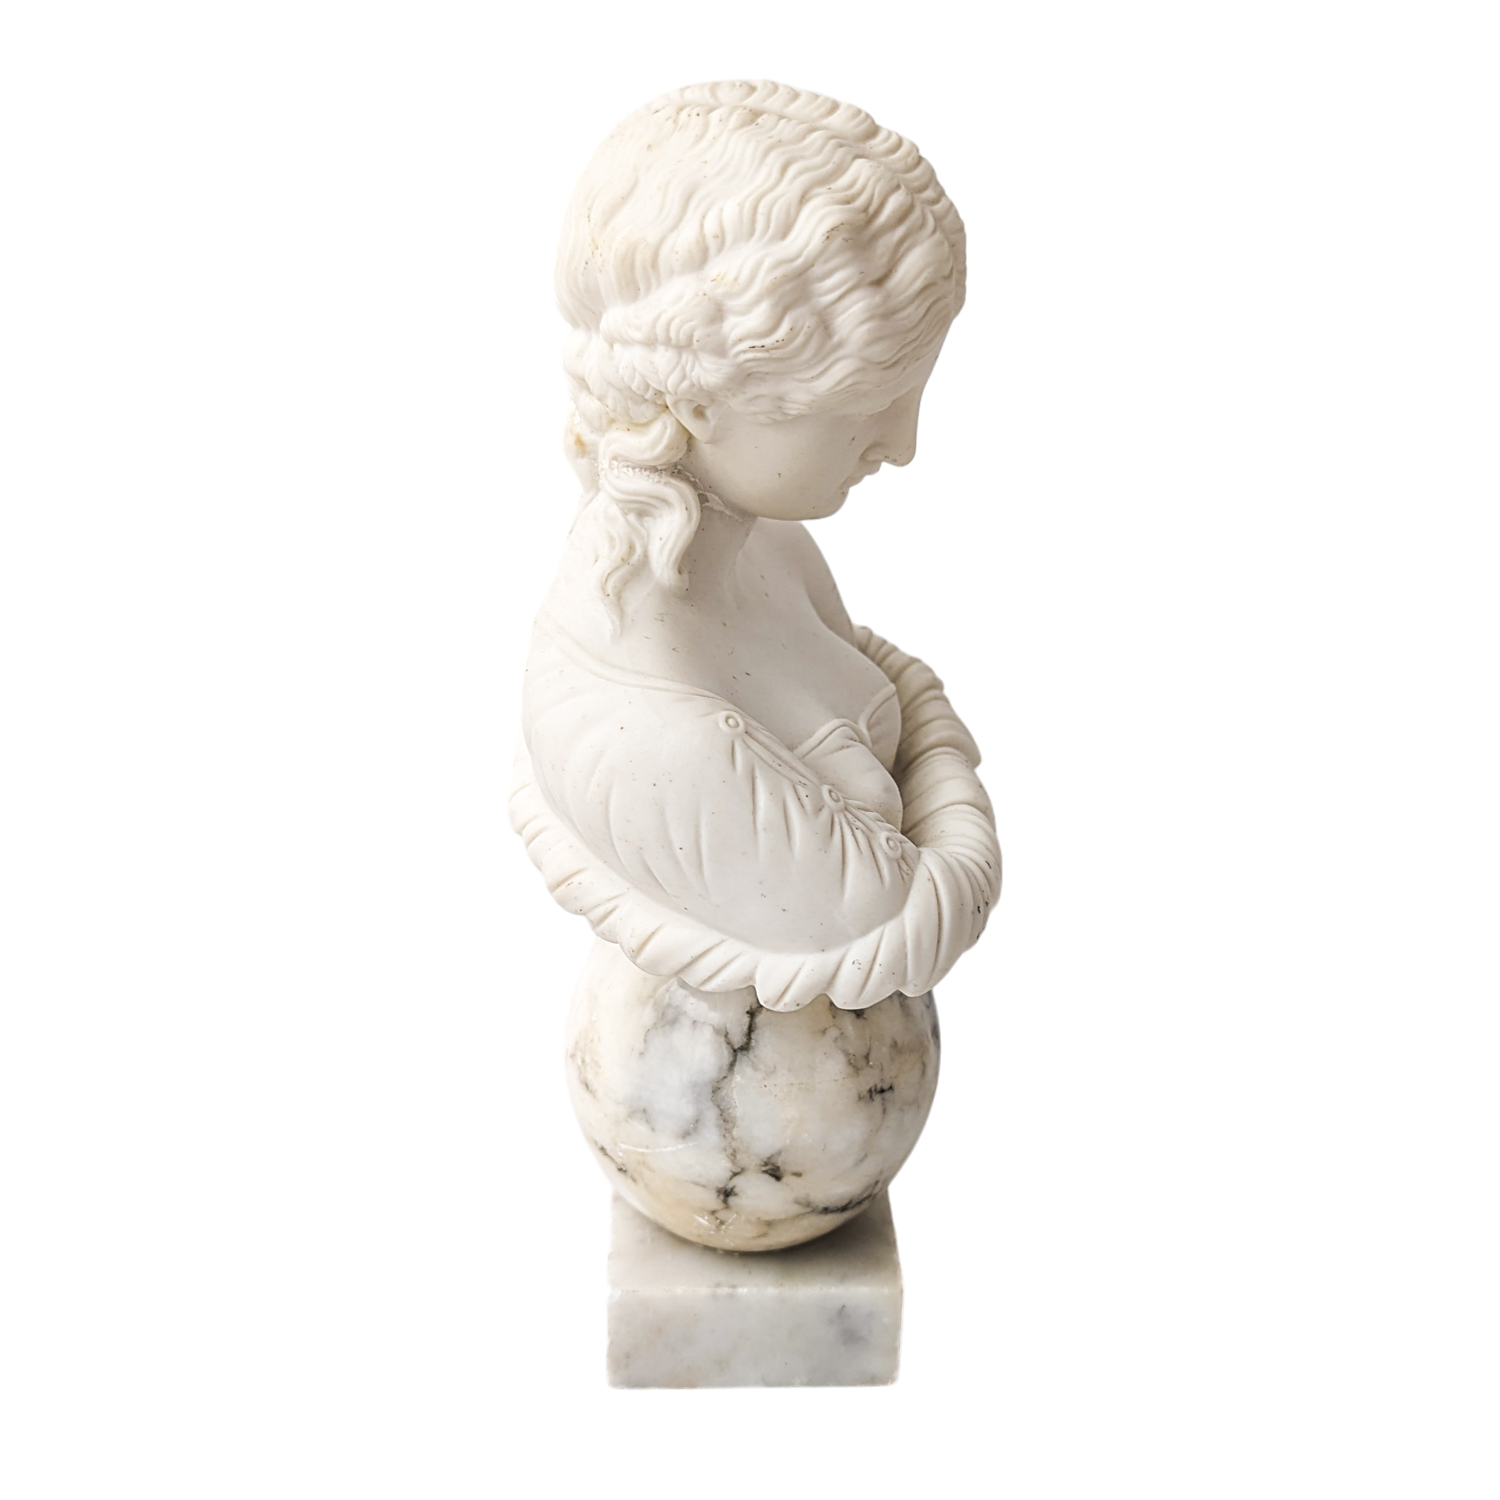 Vintage Parian Bust of Clytie the Water Nymph